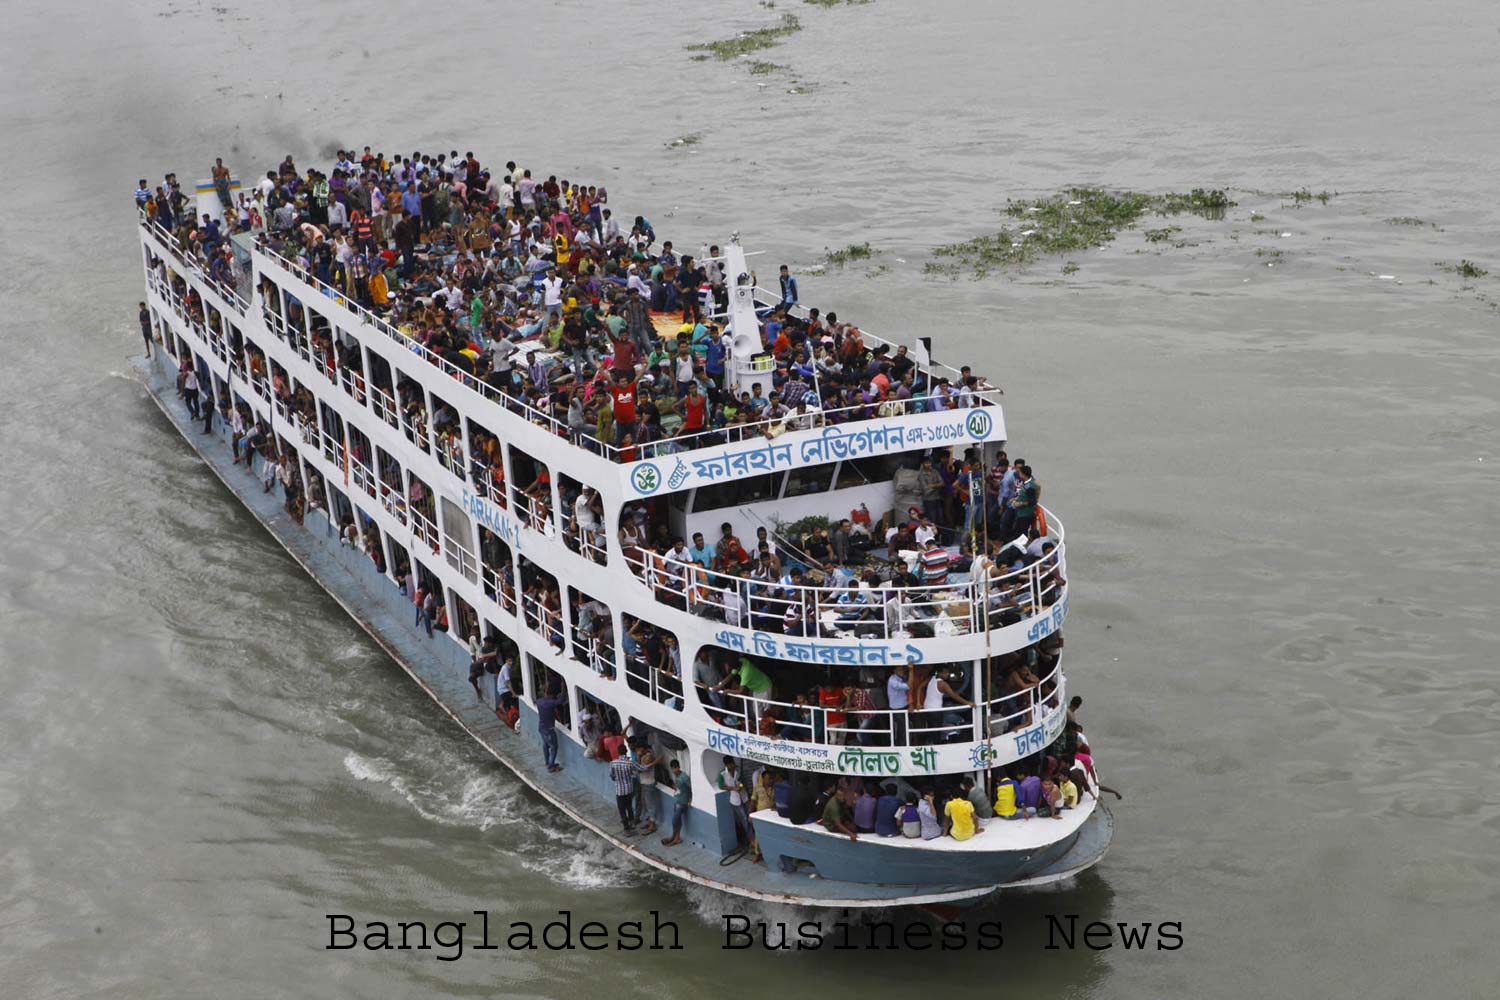 City dwellers returning to Bangladesh’s capital after Eid vacation